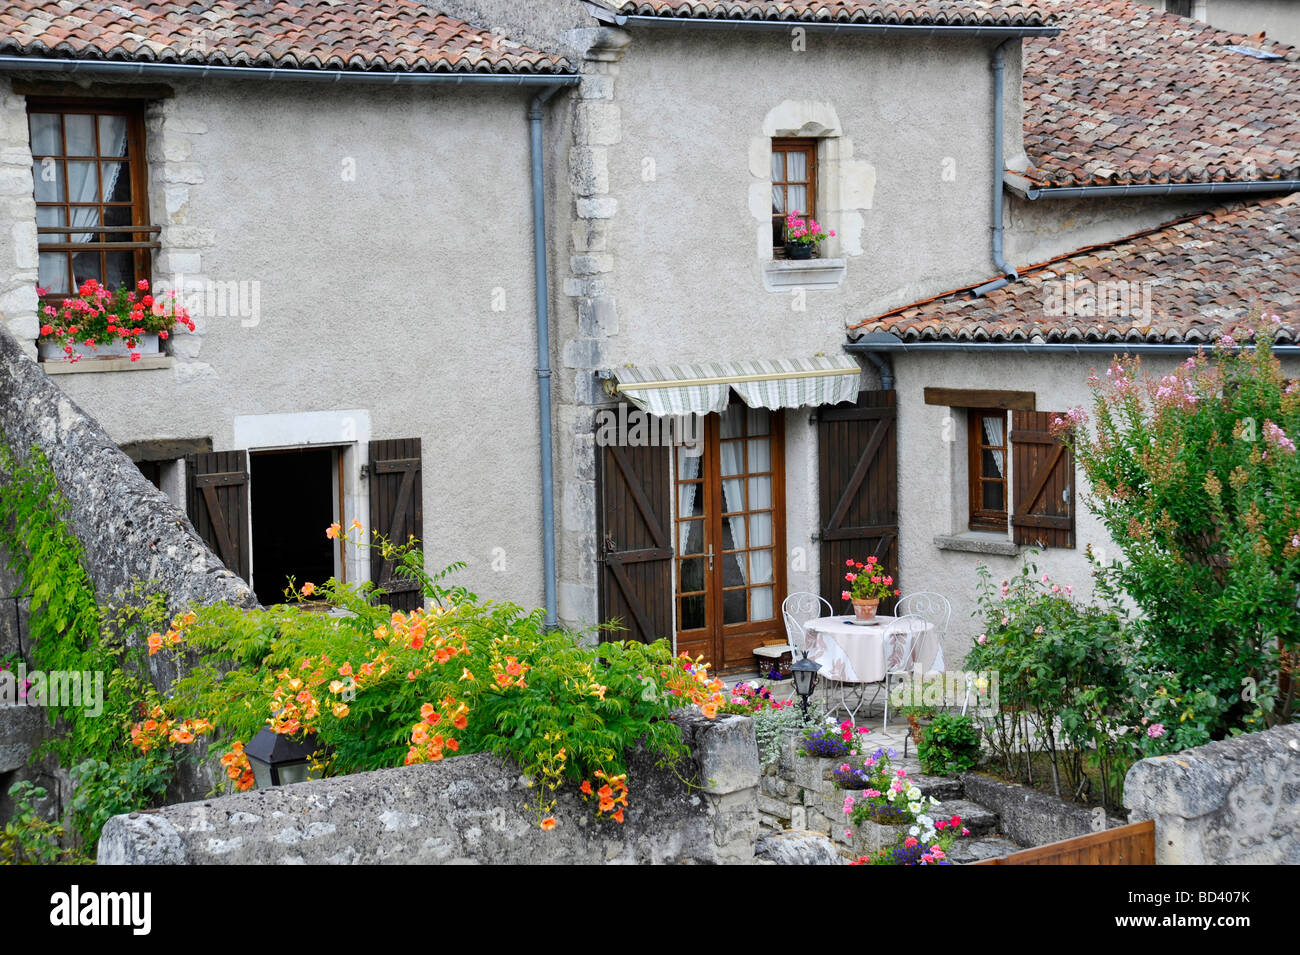 Old medieval architecture in the town of Chauvigny, France. Stock Photo